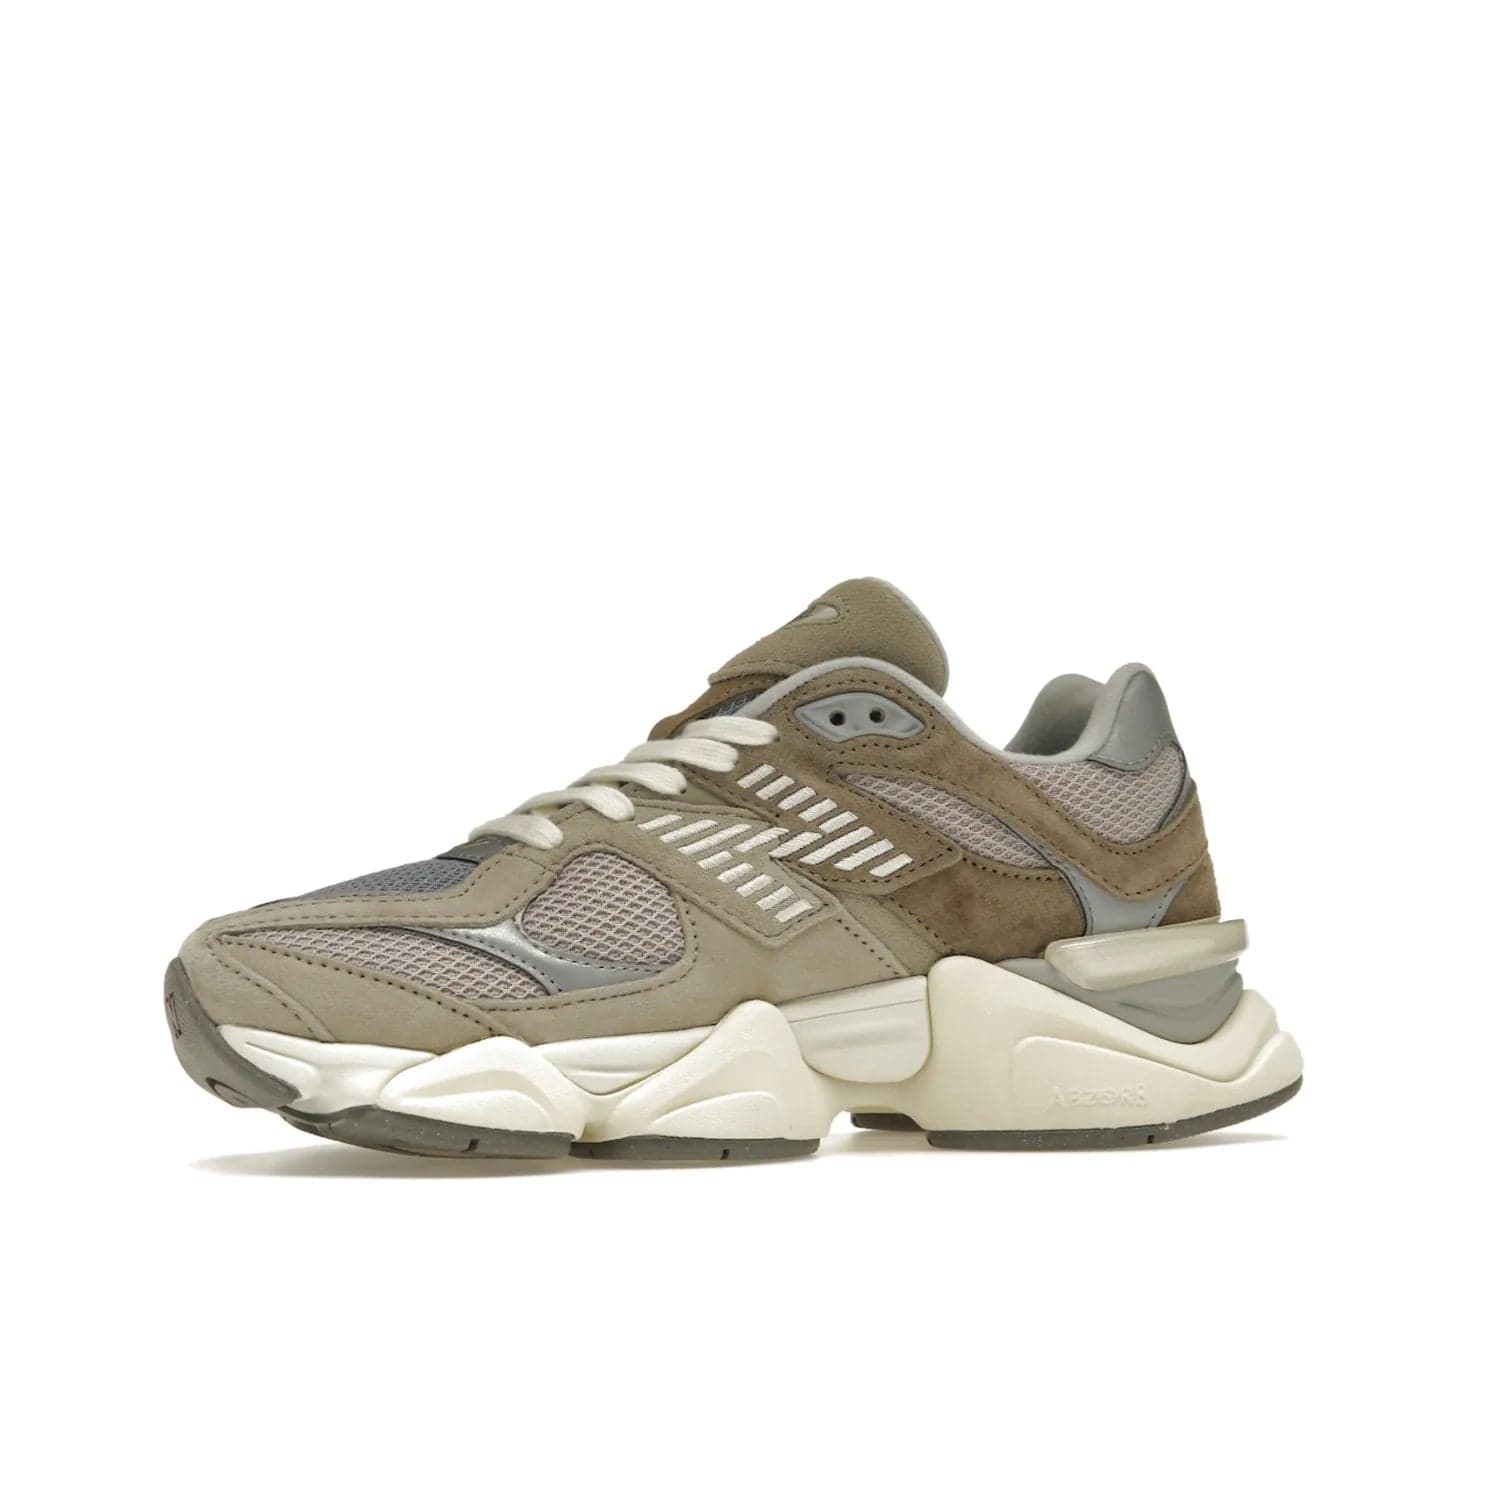 New Balance 9060 Mushroom - Image 17 - Only at www.BallersClubKickz.com - Get the New Balance 9060 Mushroom in stylish aluminum and mushroom tones. Featuring a porous mesh fabric with multiple suede overlays, a grey N symbol and rugged off-white/grey sole. Shop now and make a statement.